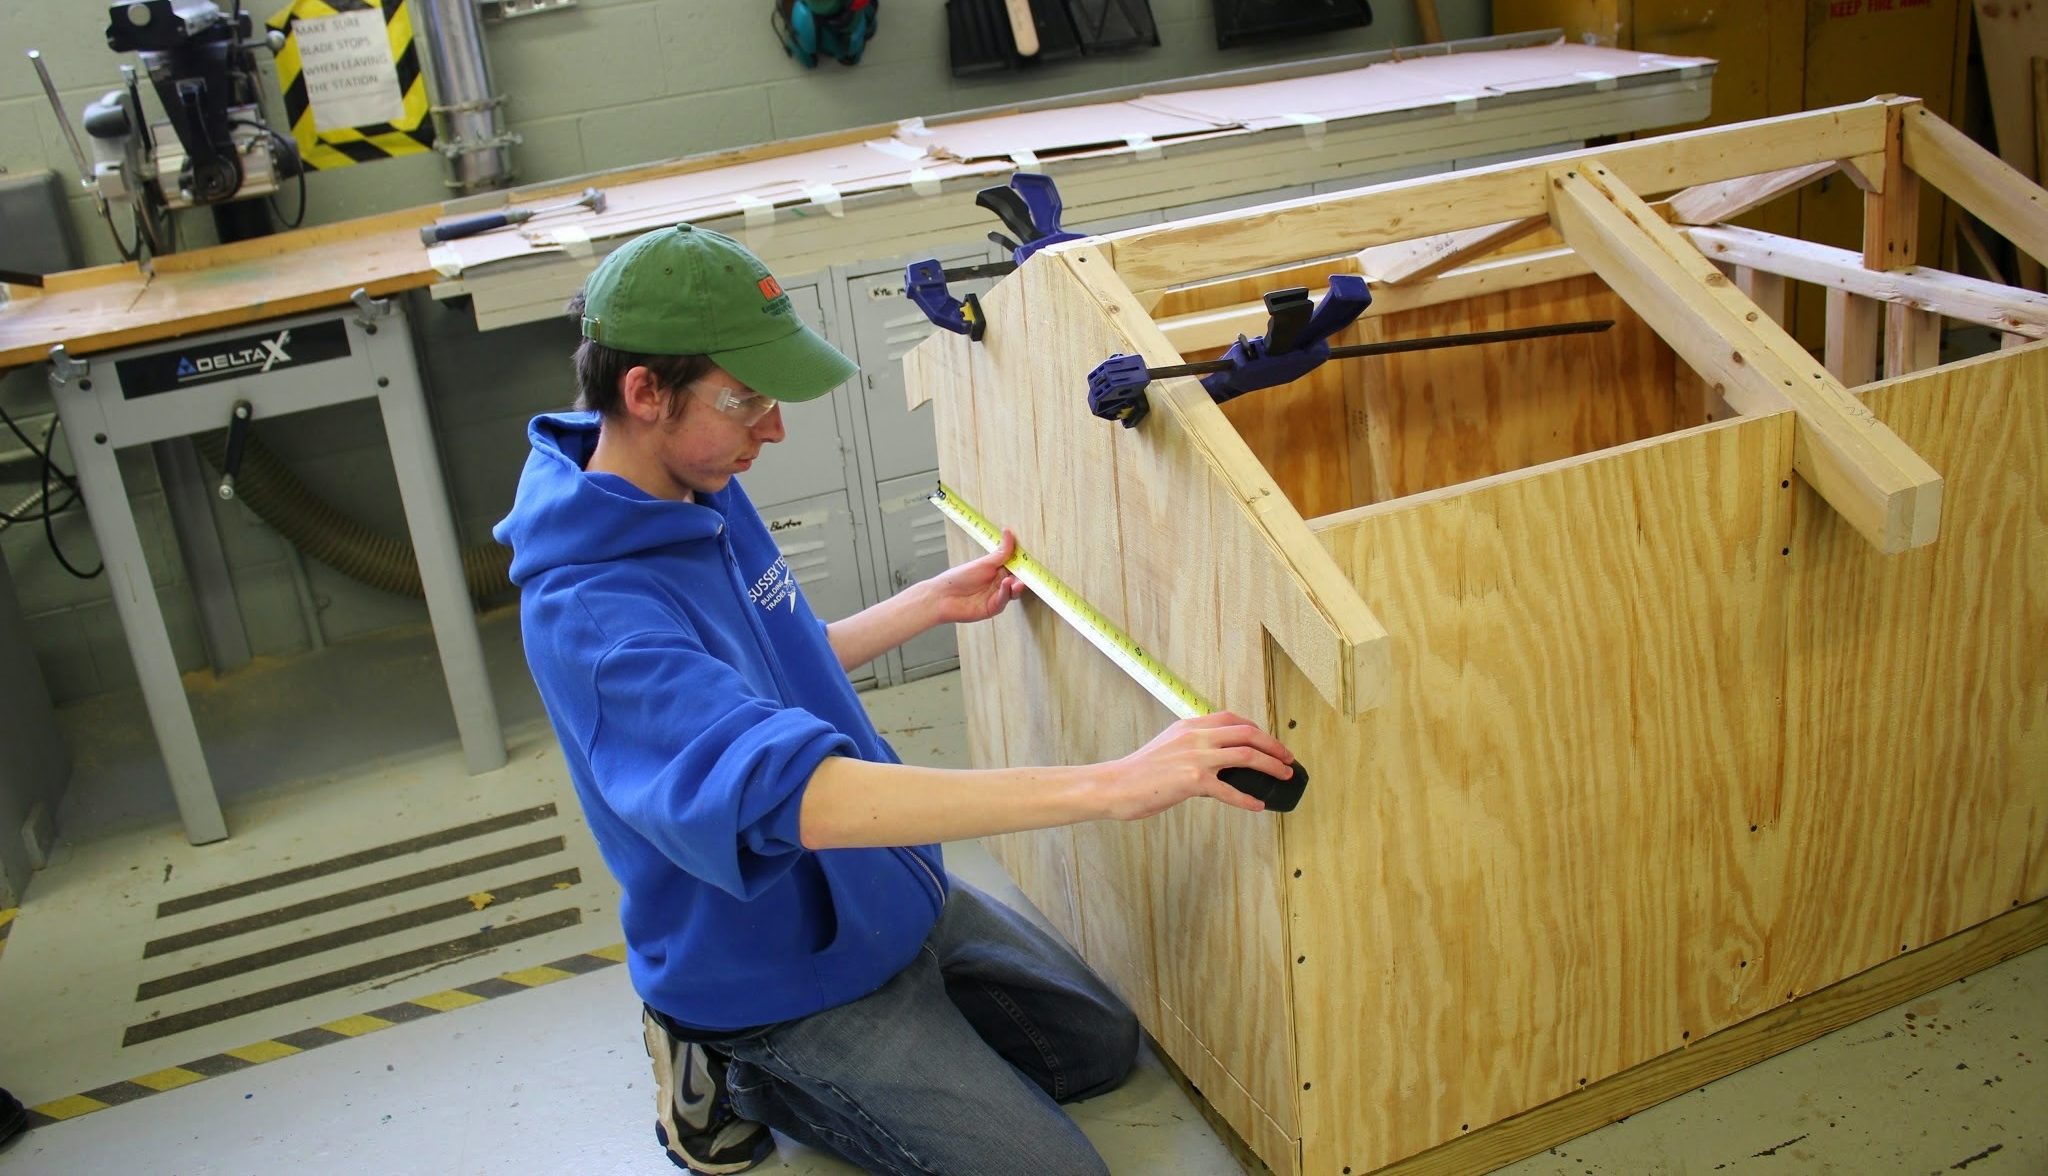 Sussex County Carpentry Student